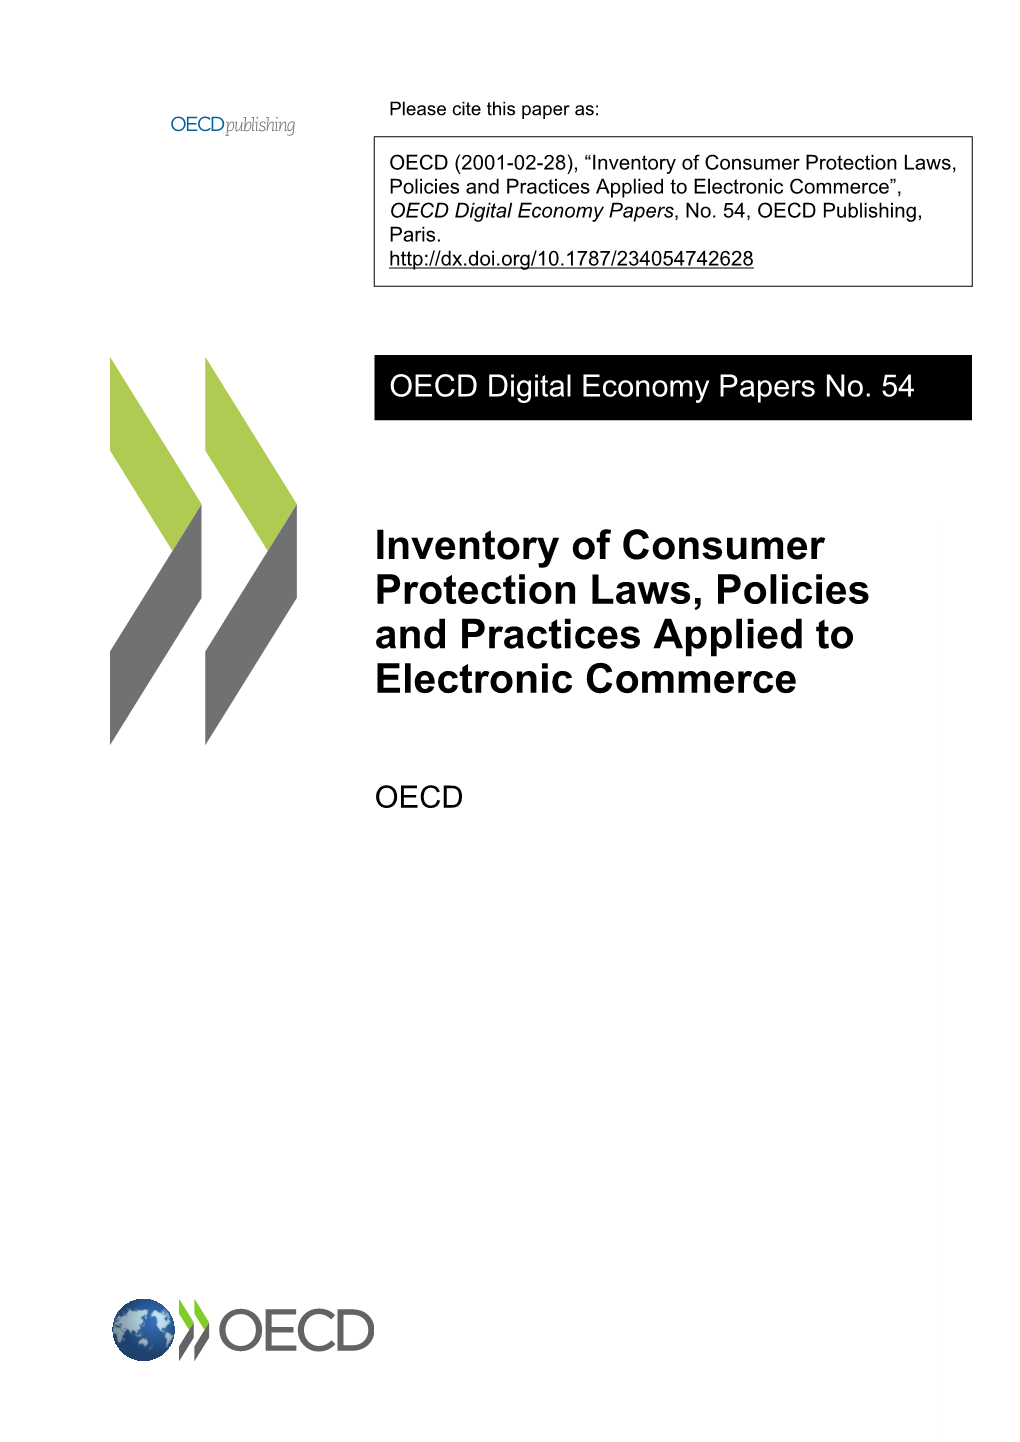 Inventory of Consumer Protection Laws, Policies and Practices Applied to Electronic Commerce”, OECD Digital Economy Papers, No